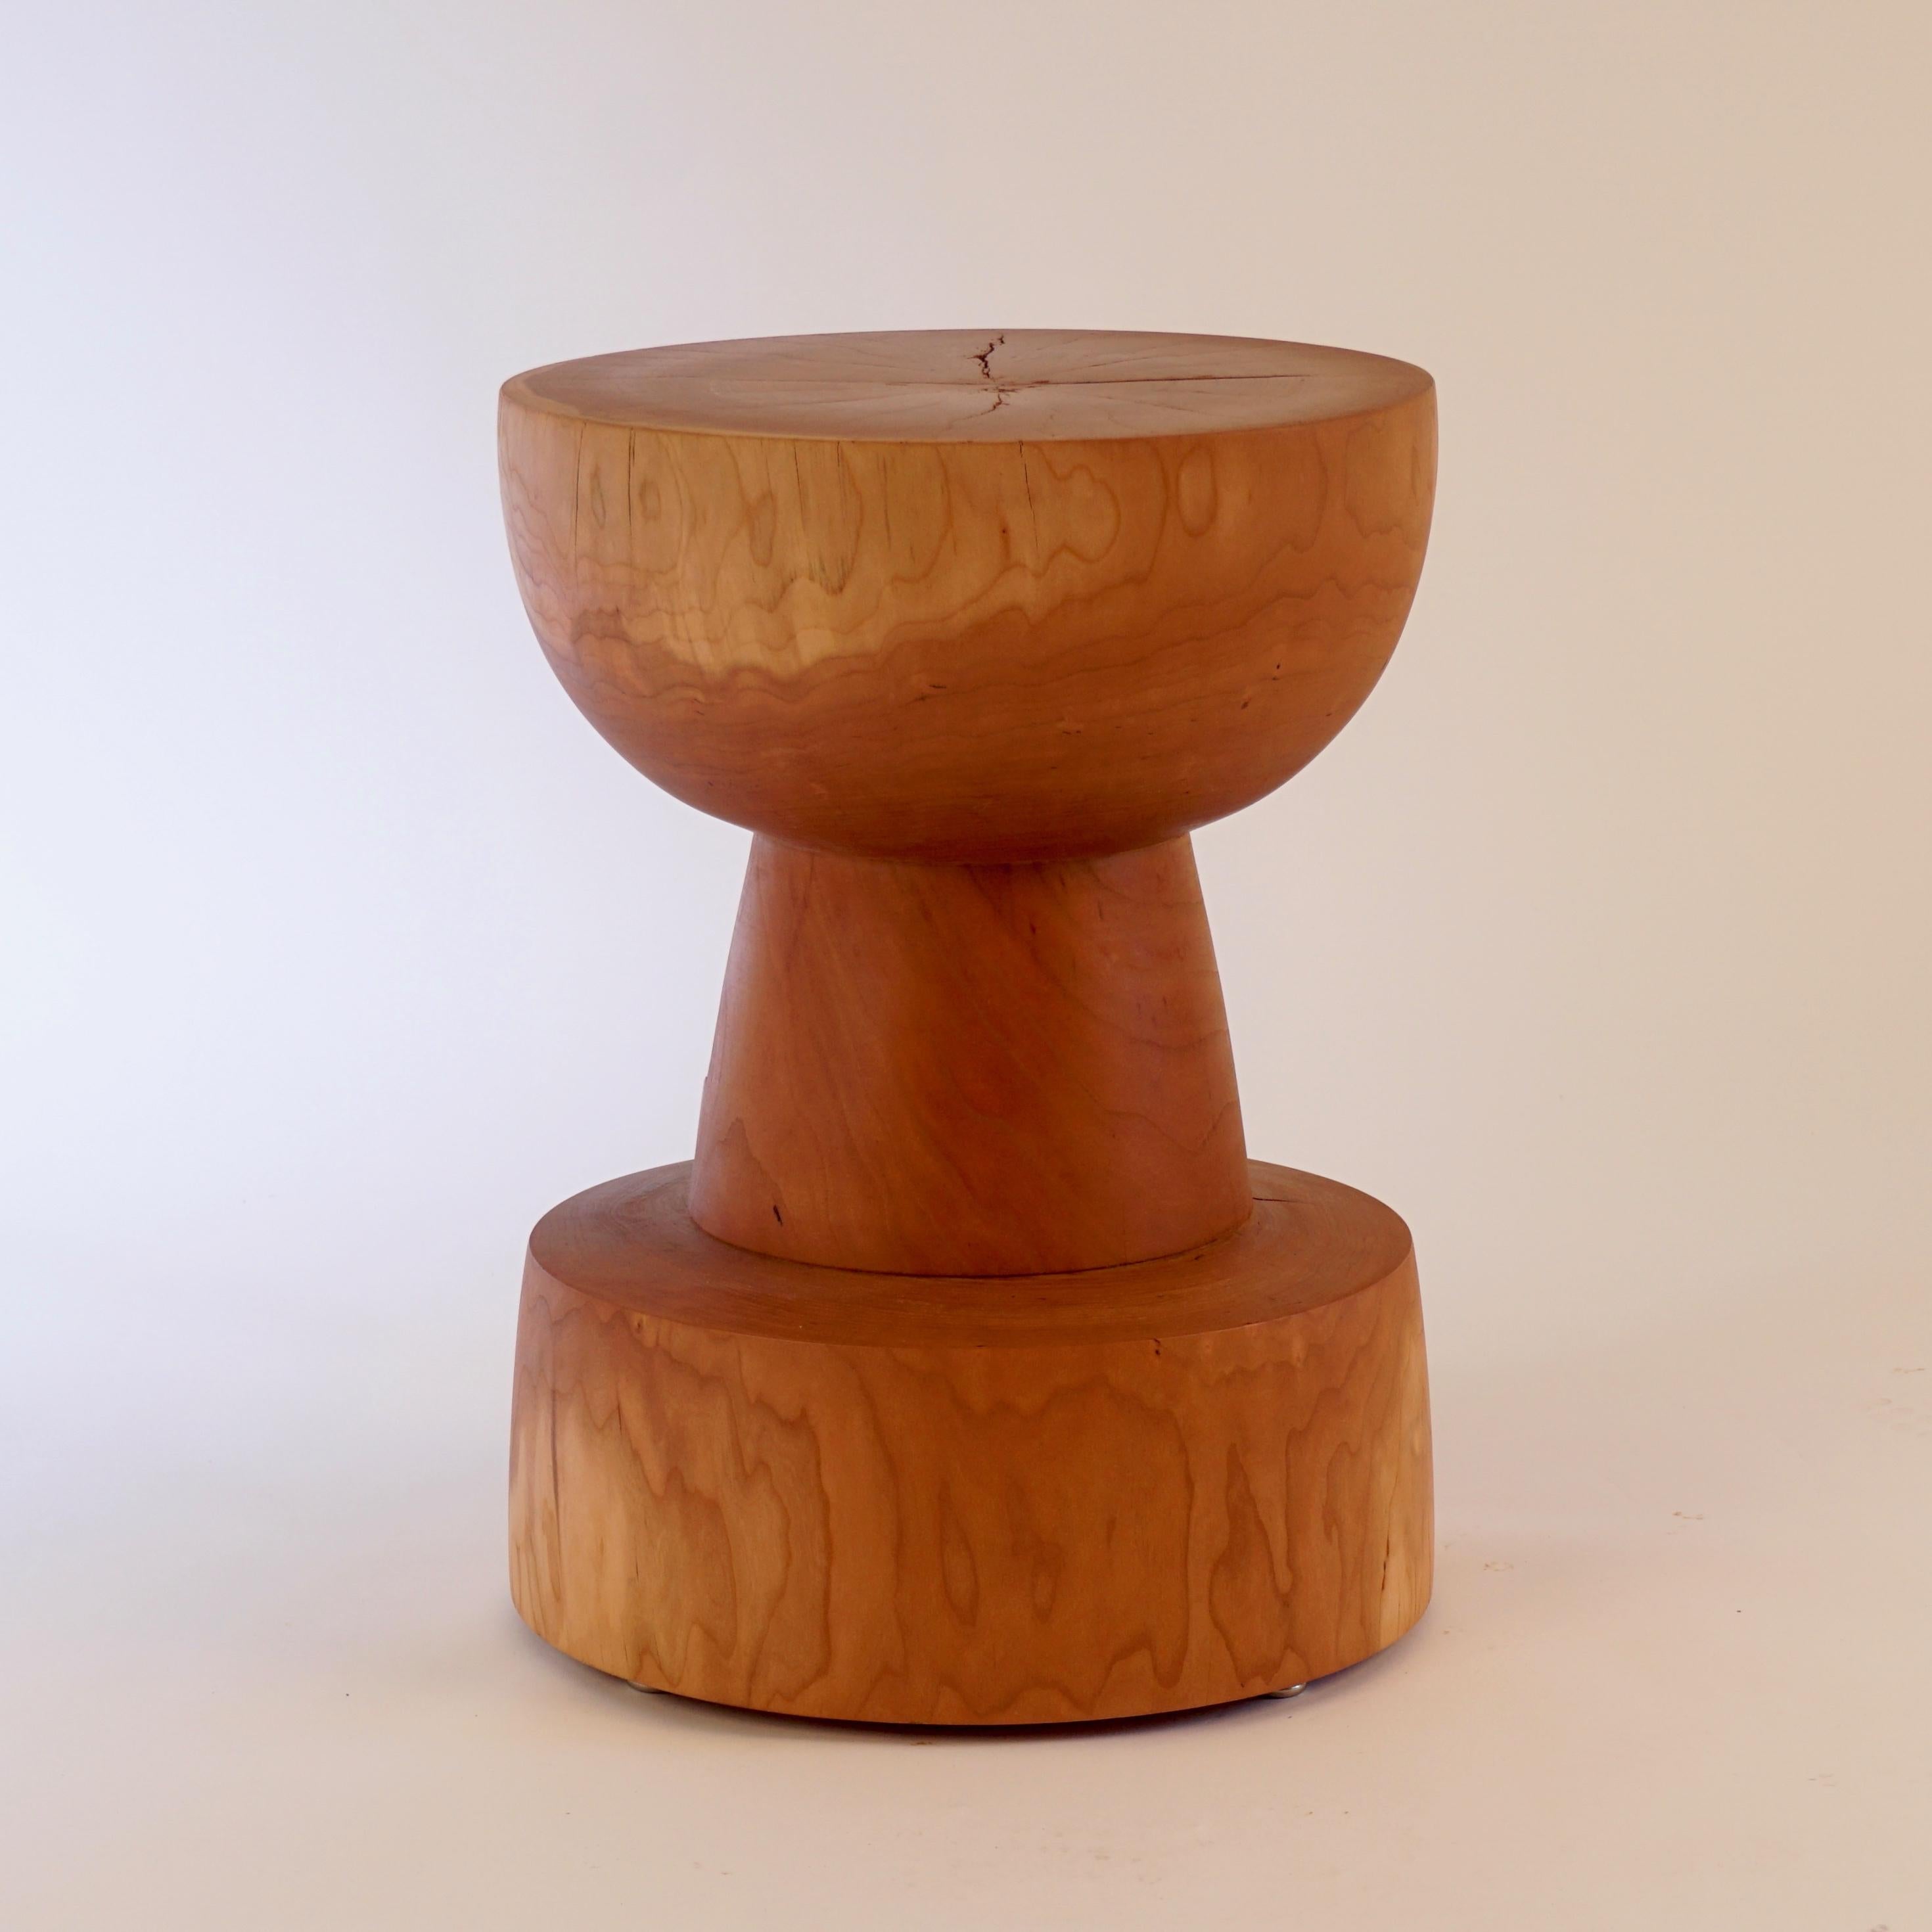 This custom version of the #7 Pedestal, one of the ten original shapes in the Lehrecke Pedestal collection from 1996, is made from a beautiful cherry log, from the Hudson Valley, in New York State.

All of Lehrecke's Pedestals are made on a custom